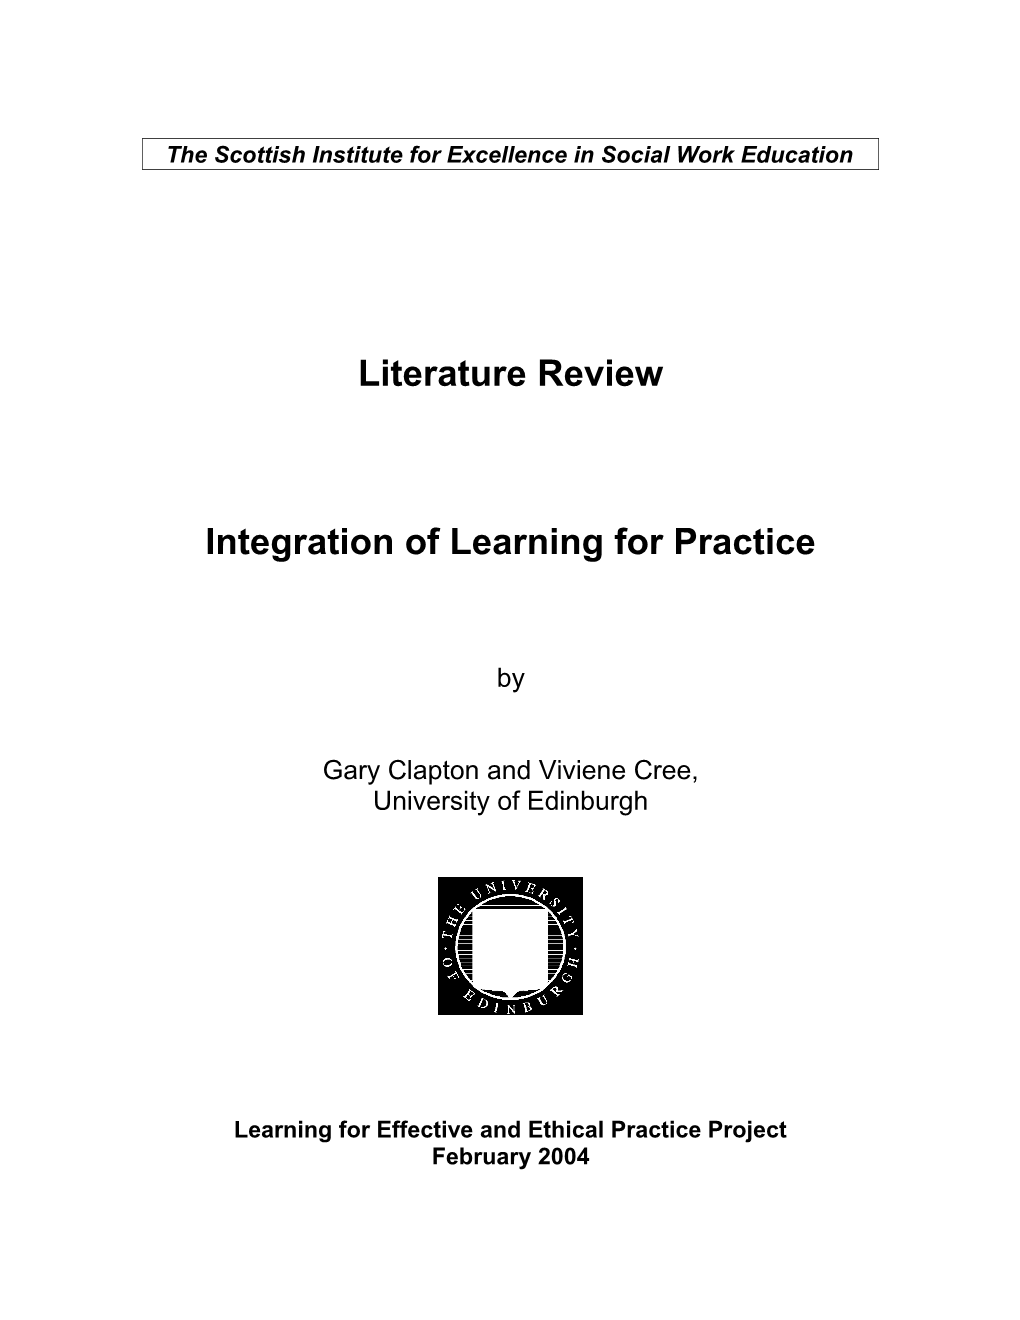 The Integration of Learning for Practice: Definitions and Problems of Measurement